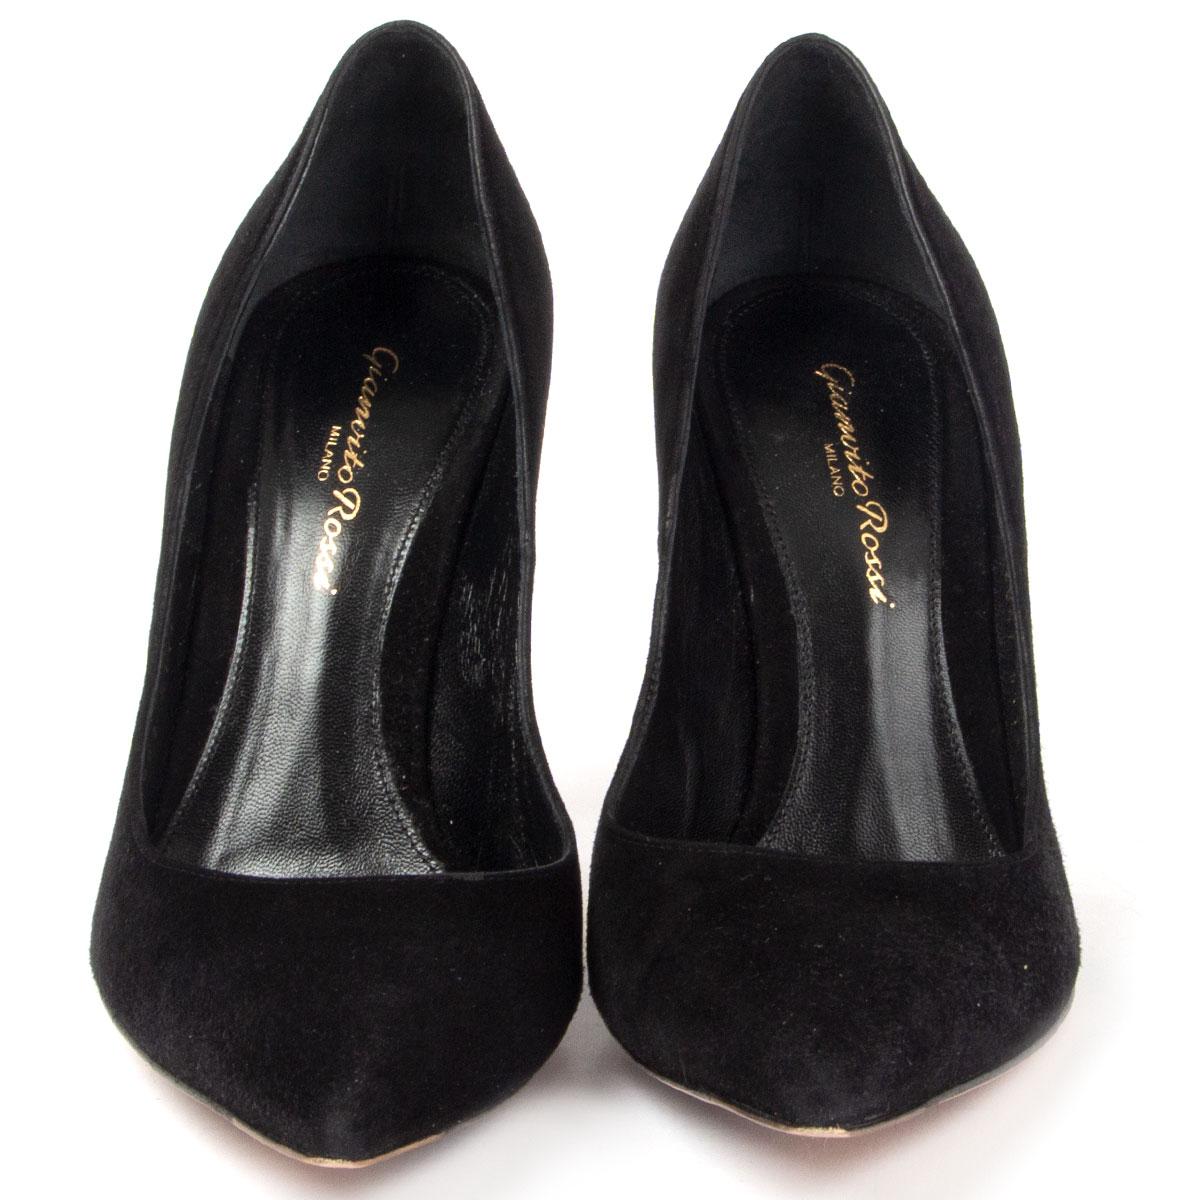 100% authentic Gianvito Rossi pointed-toe pumps in black suede. Have been worn and are in excellent condition. Come with dust bag. 

Imprinted Size	37.5
Shoe Size	37.5
Inside Sole	25cm (9.8in)
Width	7.5cm (2.9in)
Heel	10cm (3.9in)

All our listings